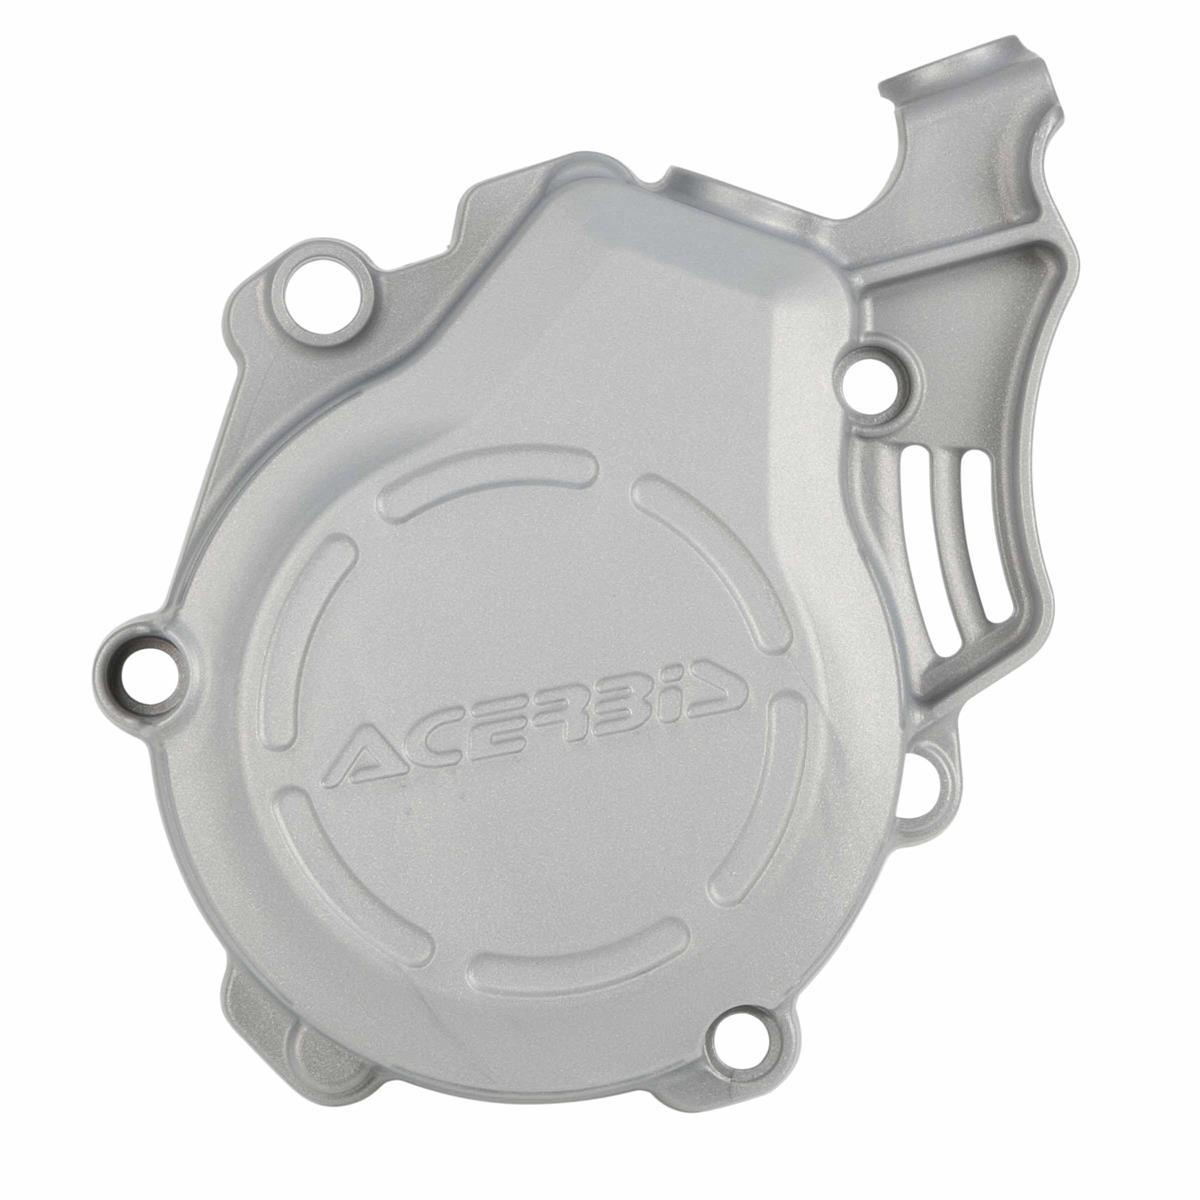 Acerbis Ignition cover protector X-Power KTM SX-F/EXC-F 450, Husqvarna FC/FE 450, Silver